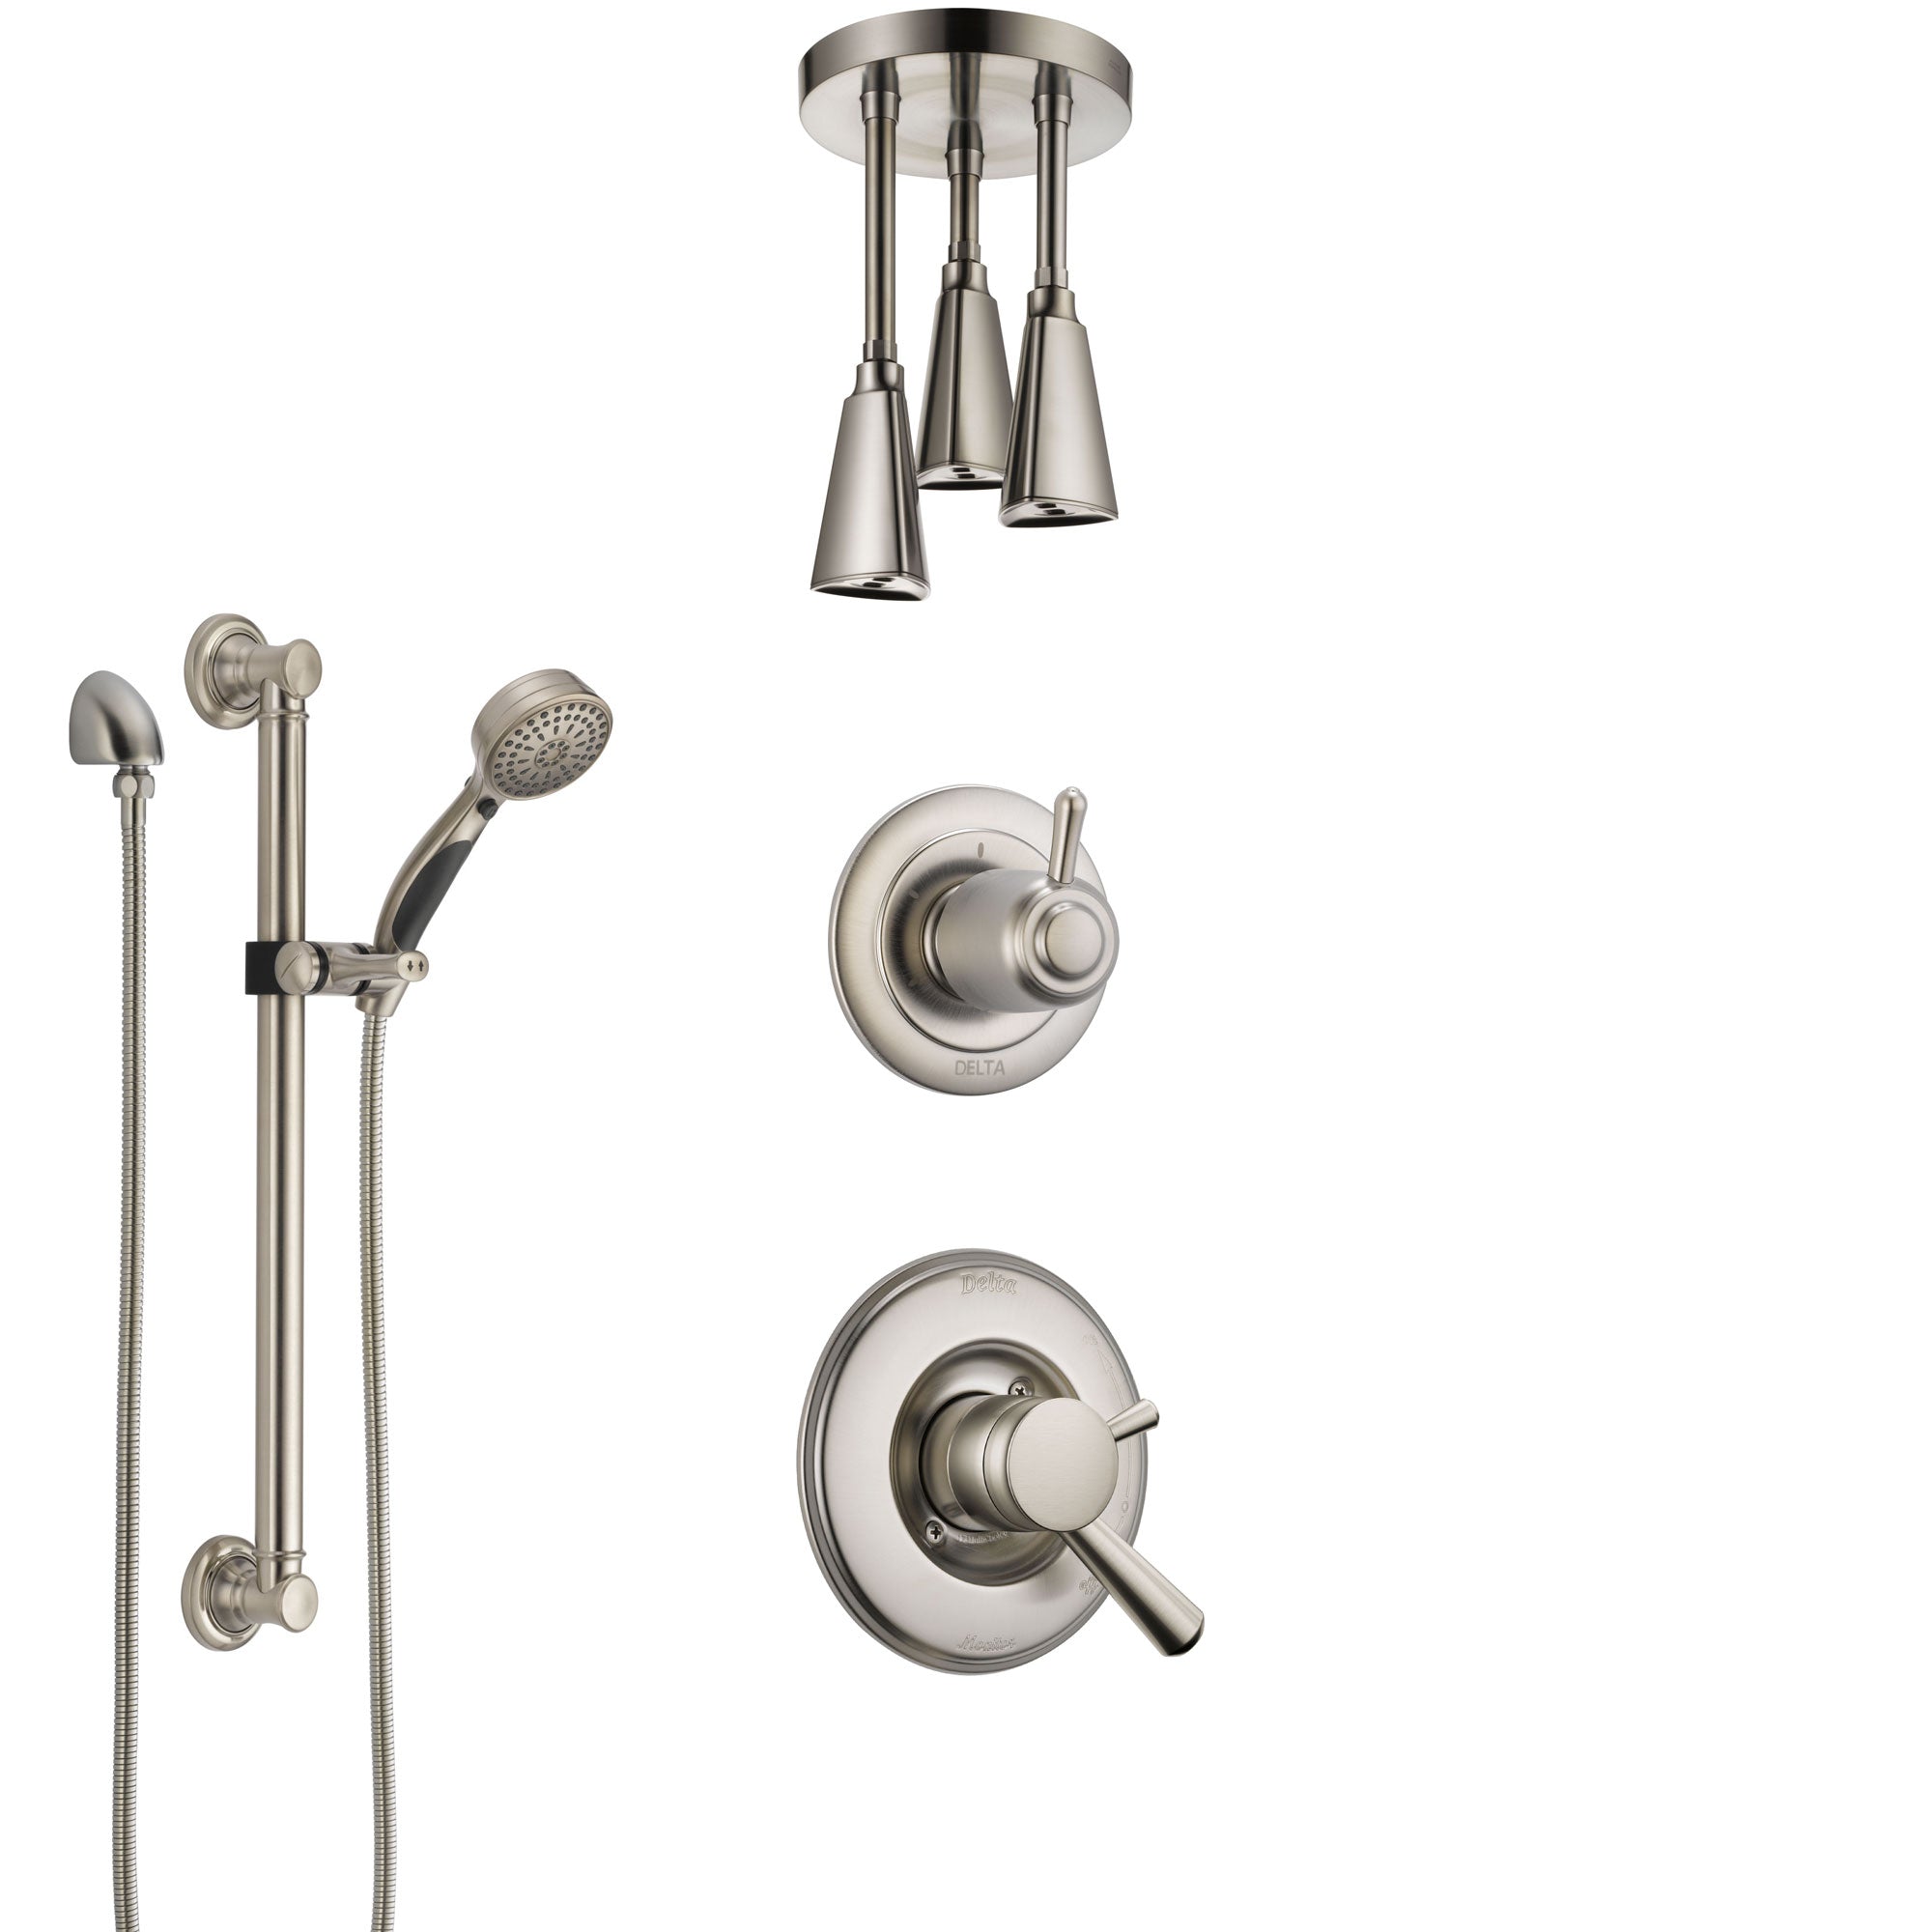 Delta Linden Dual Control Handle Stainless Steel Finish Shower System, Diverter, Ceiling Mount Showerhead, and Hand Shower with Grab Bar SS1793SS6